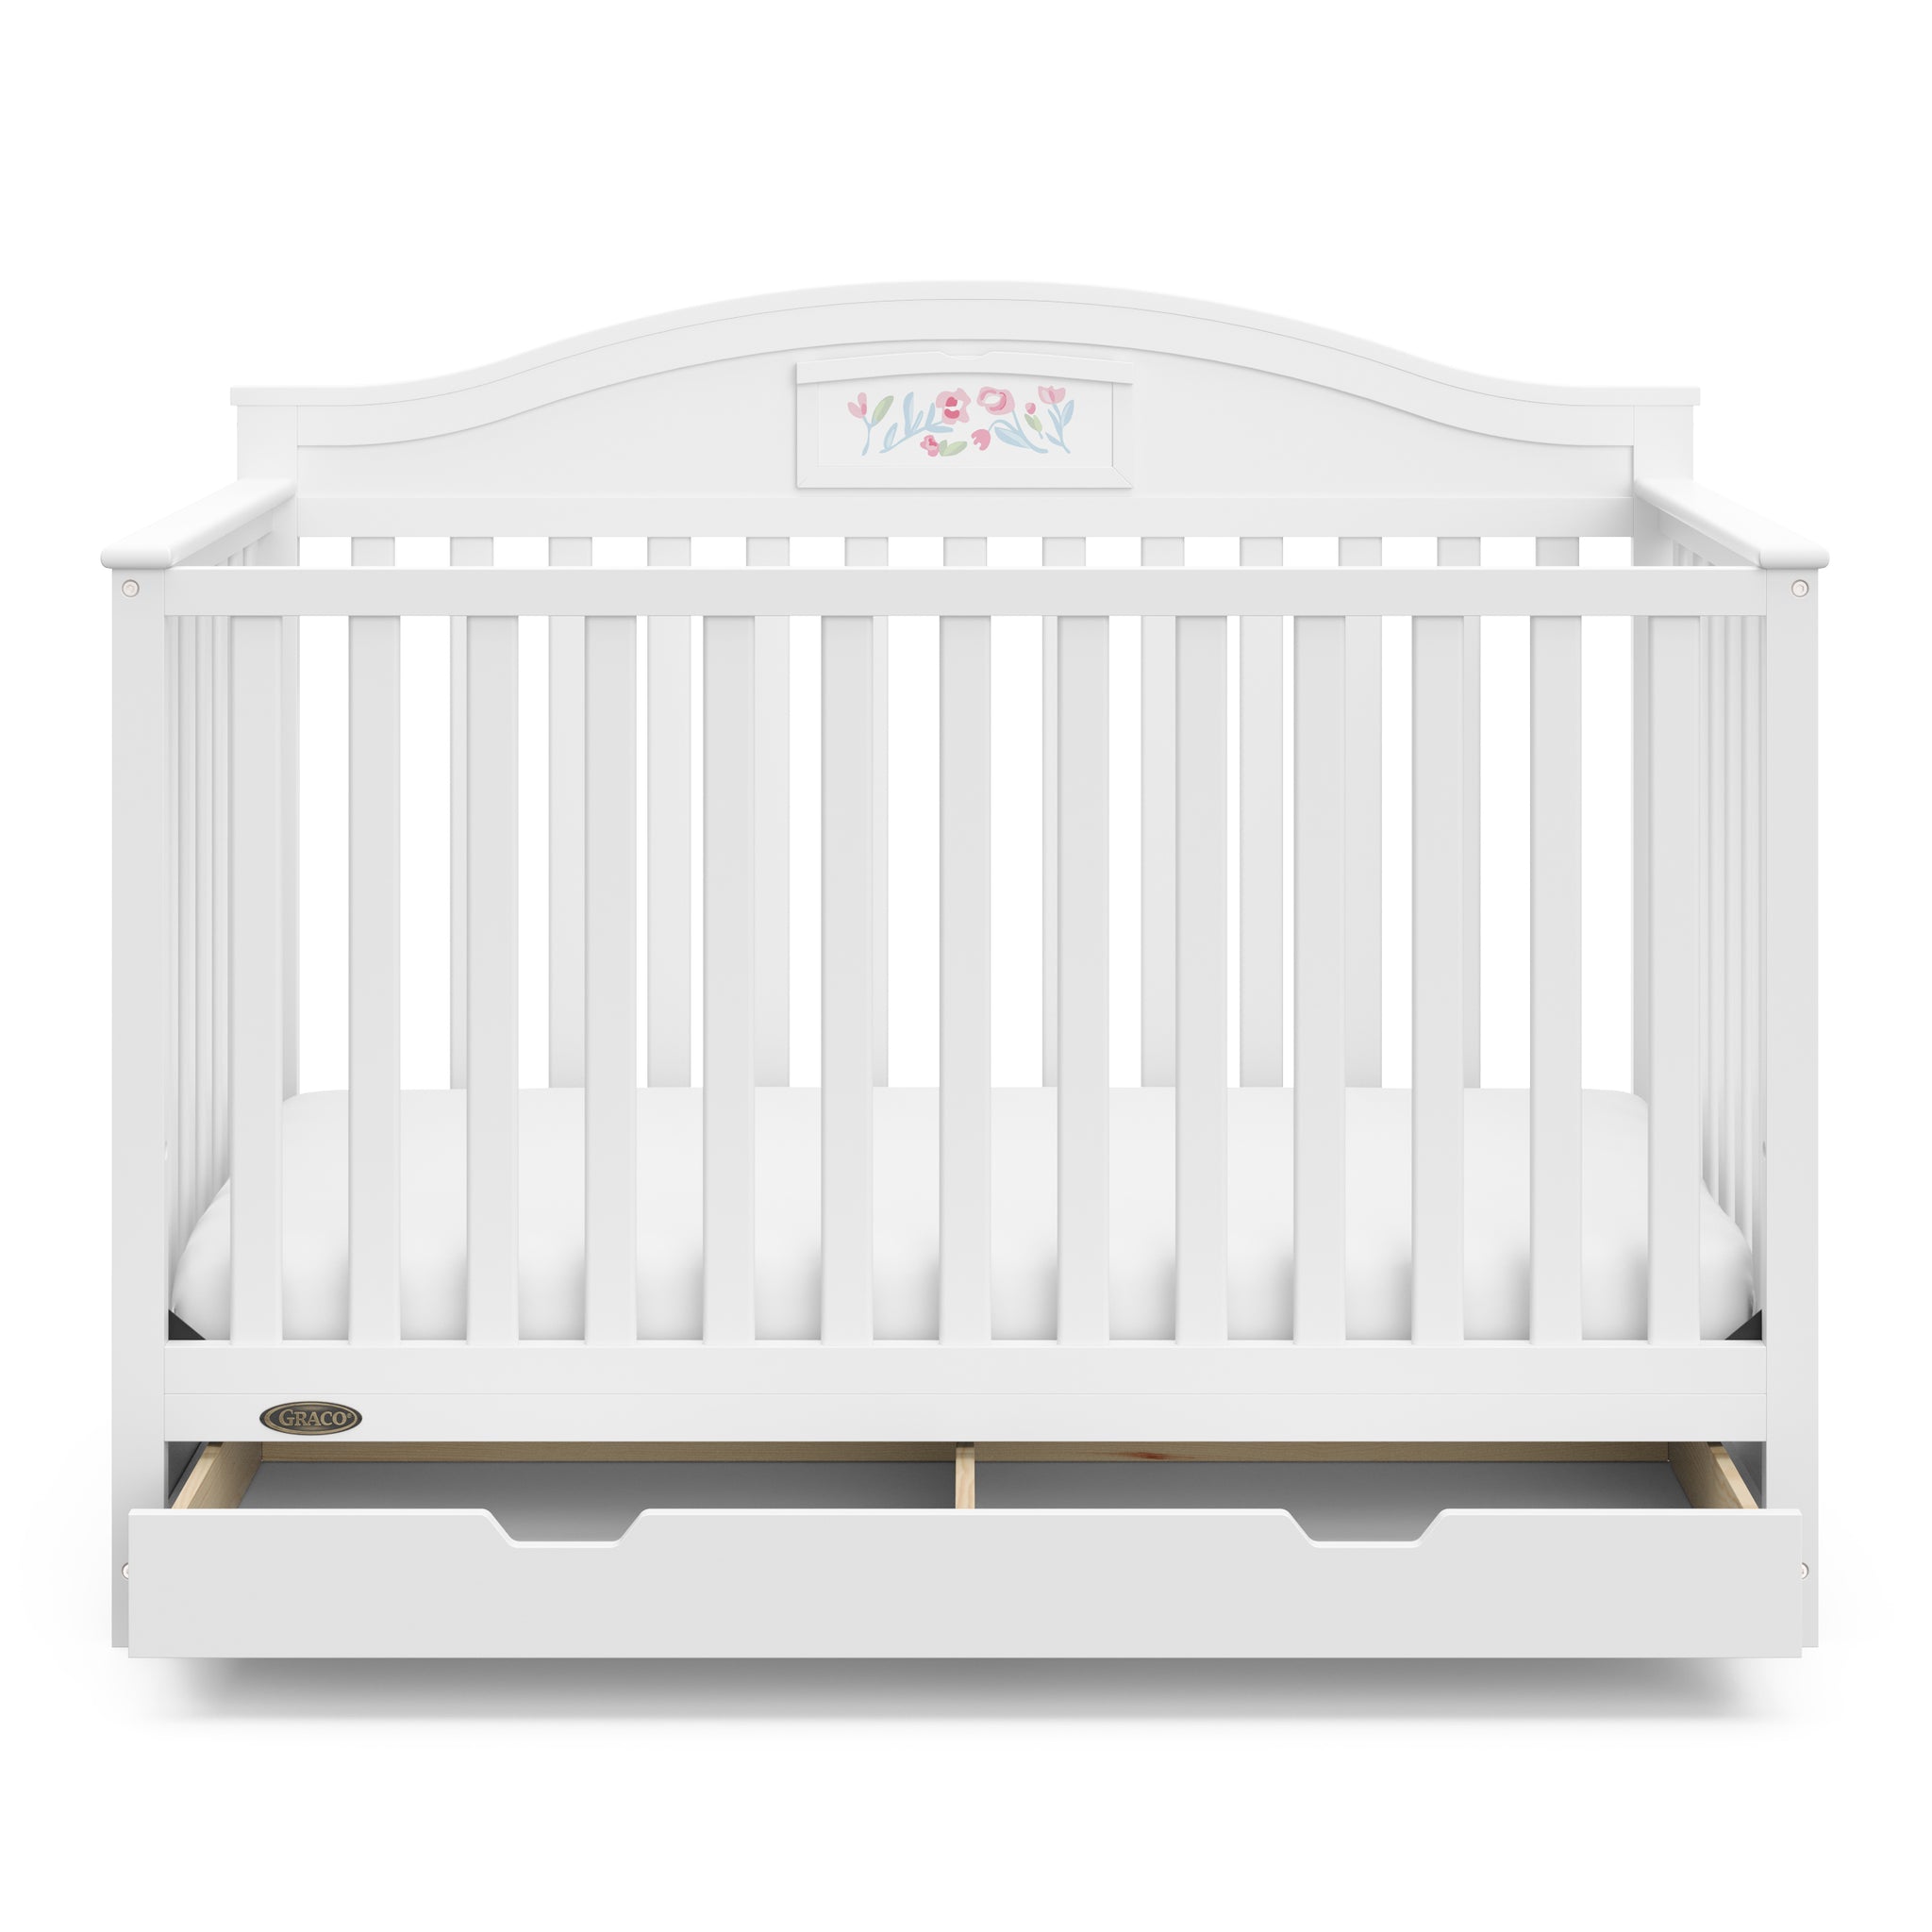 Front view of white crib with open drawer